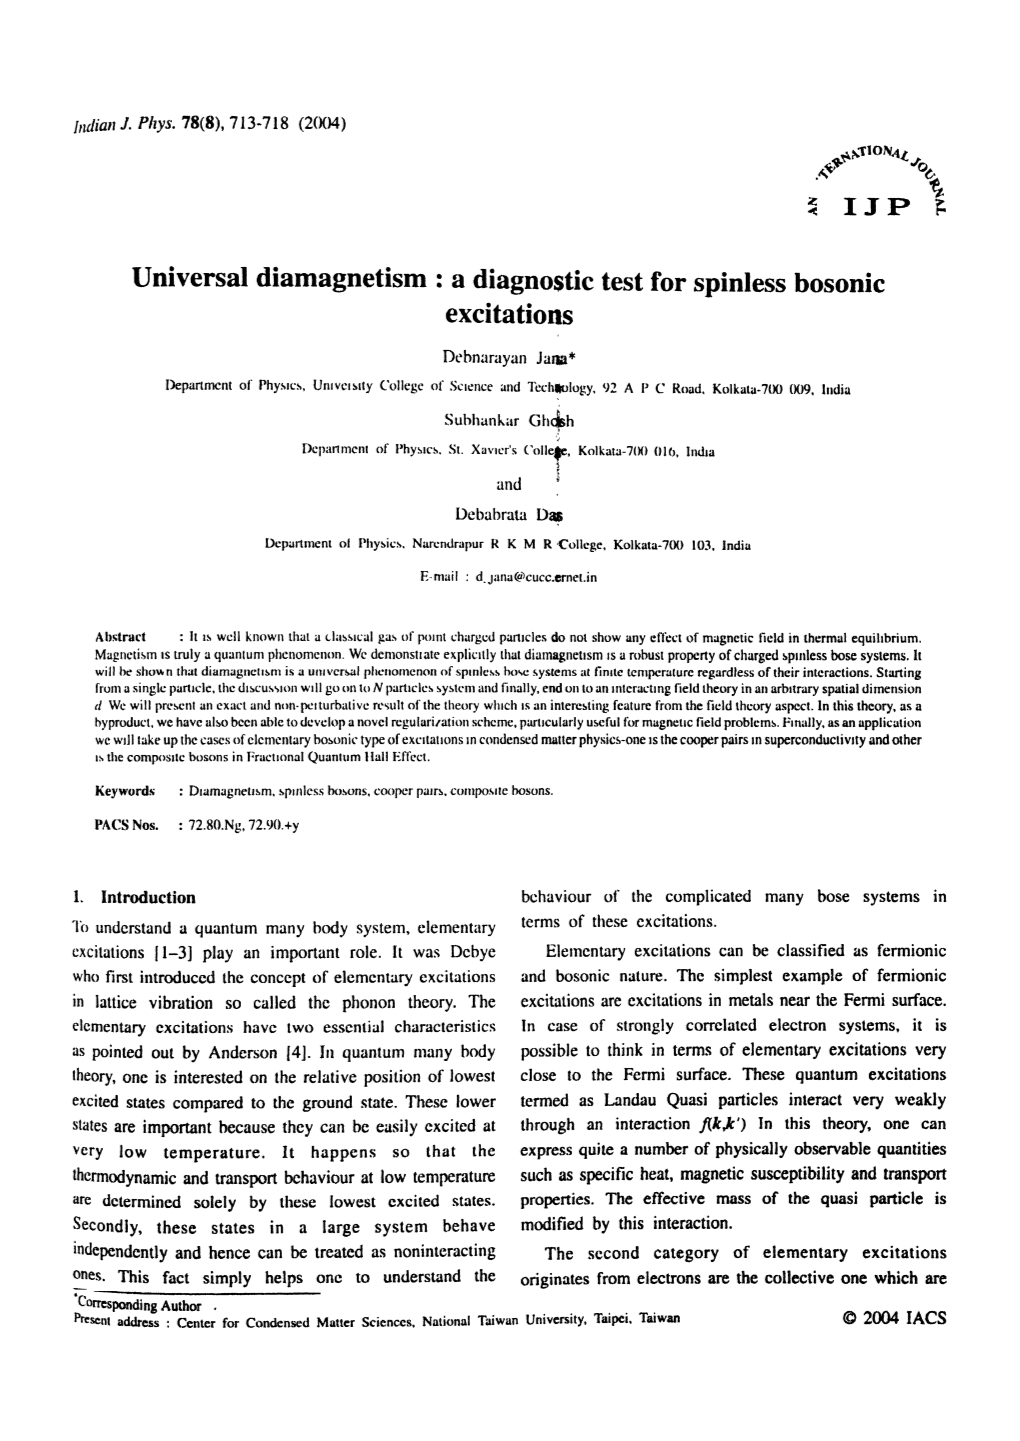 Universal Diamagnetism : a Diagnostic Test for Spinless Bosonic Excitations